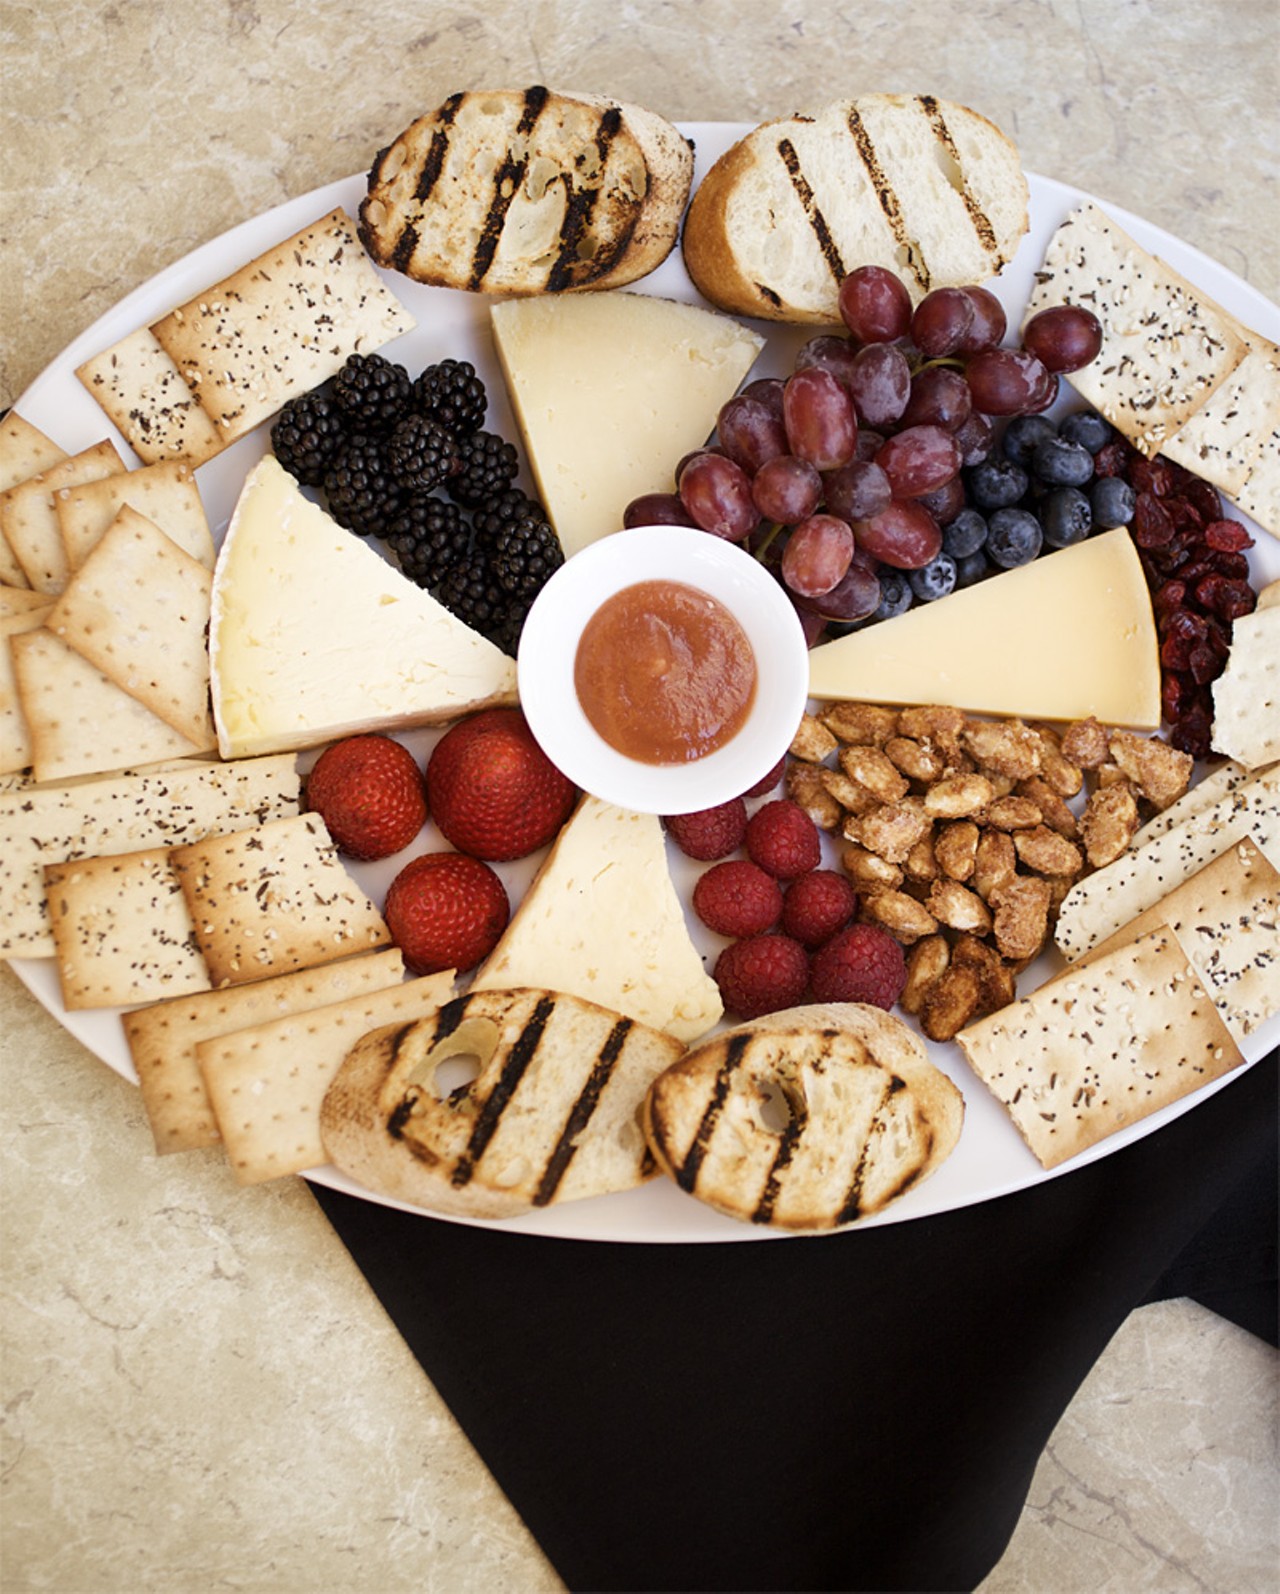 Also from the appetizer menu comes the Imported and Domestic Cheese Plate, including candied nuts, fresh and dried fruits, quince paste and grilled bread.